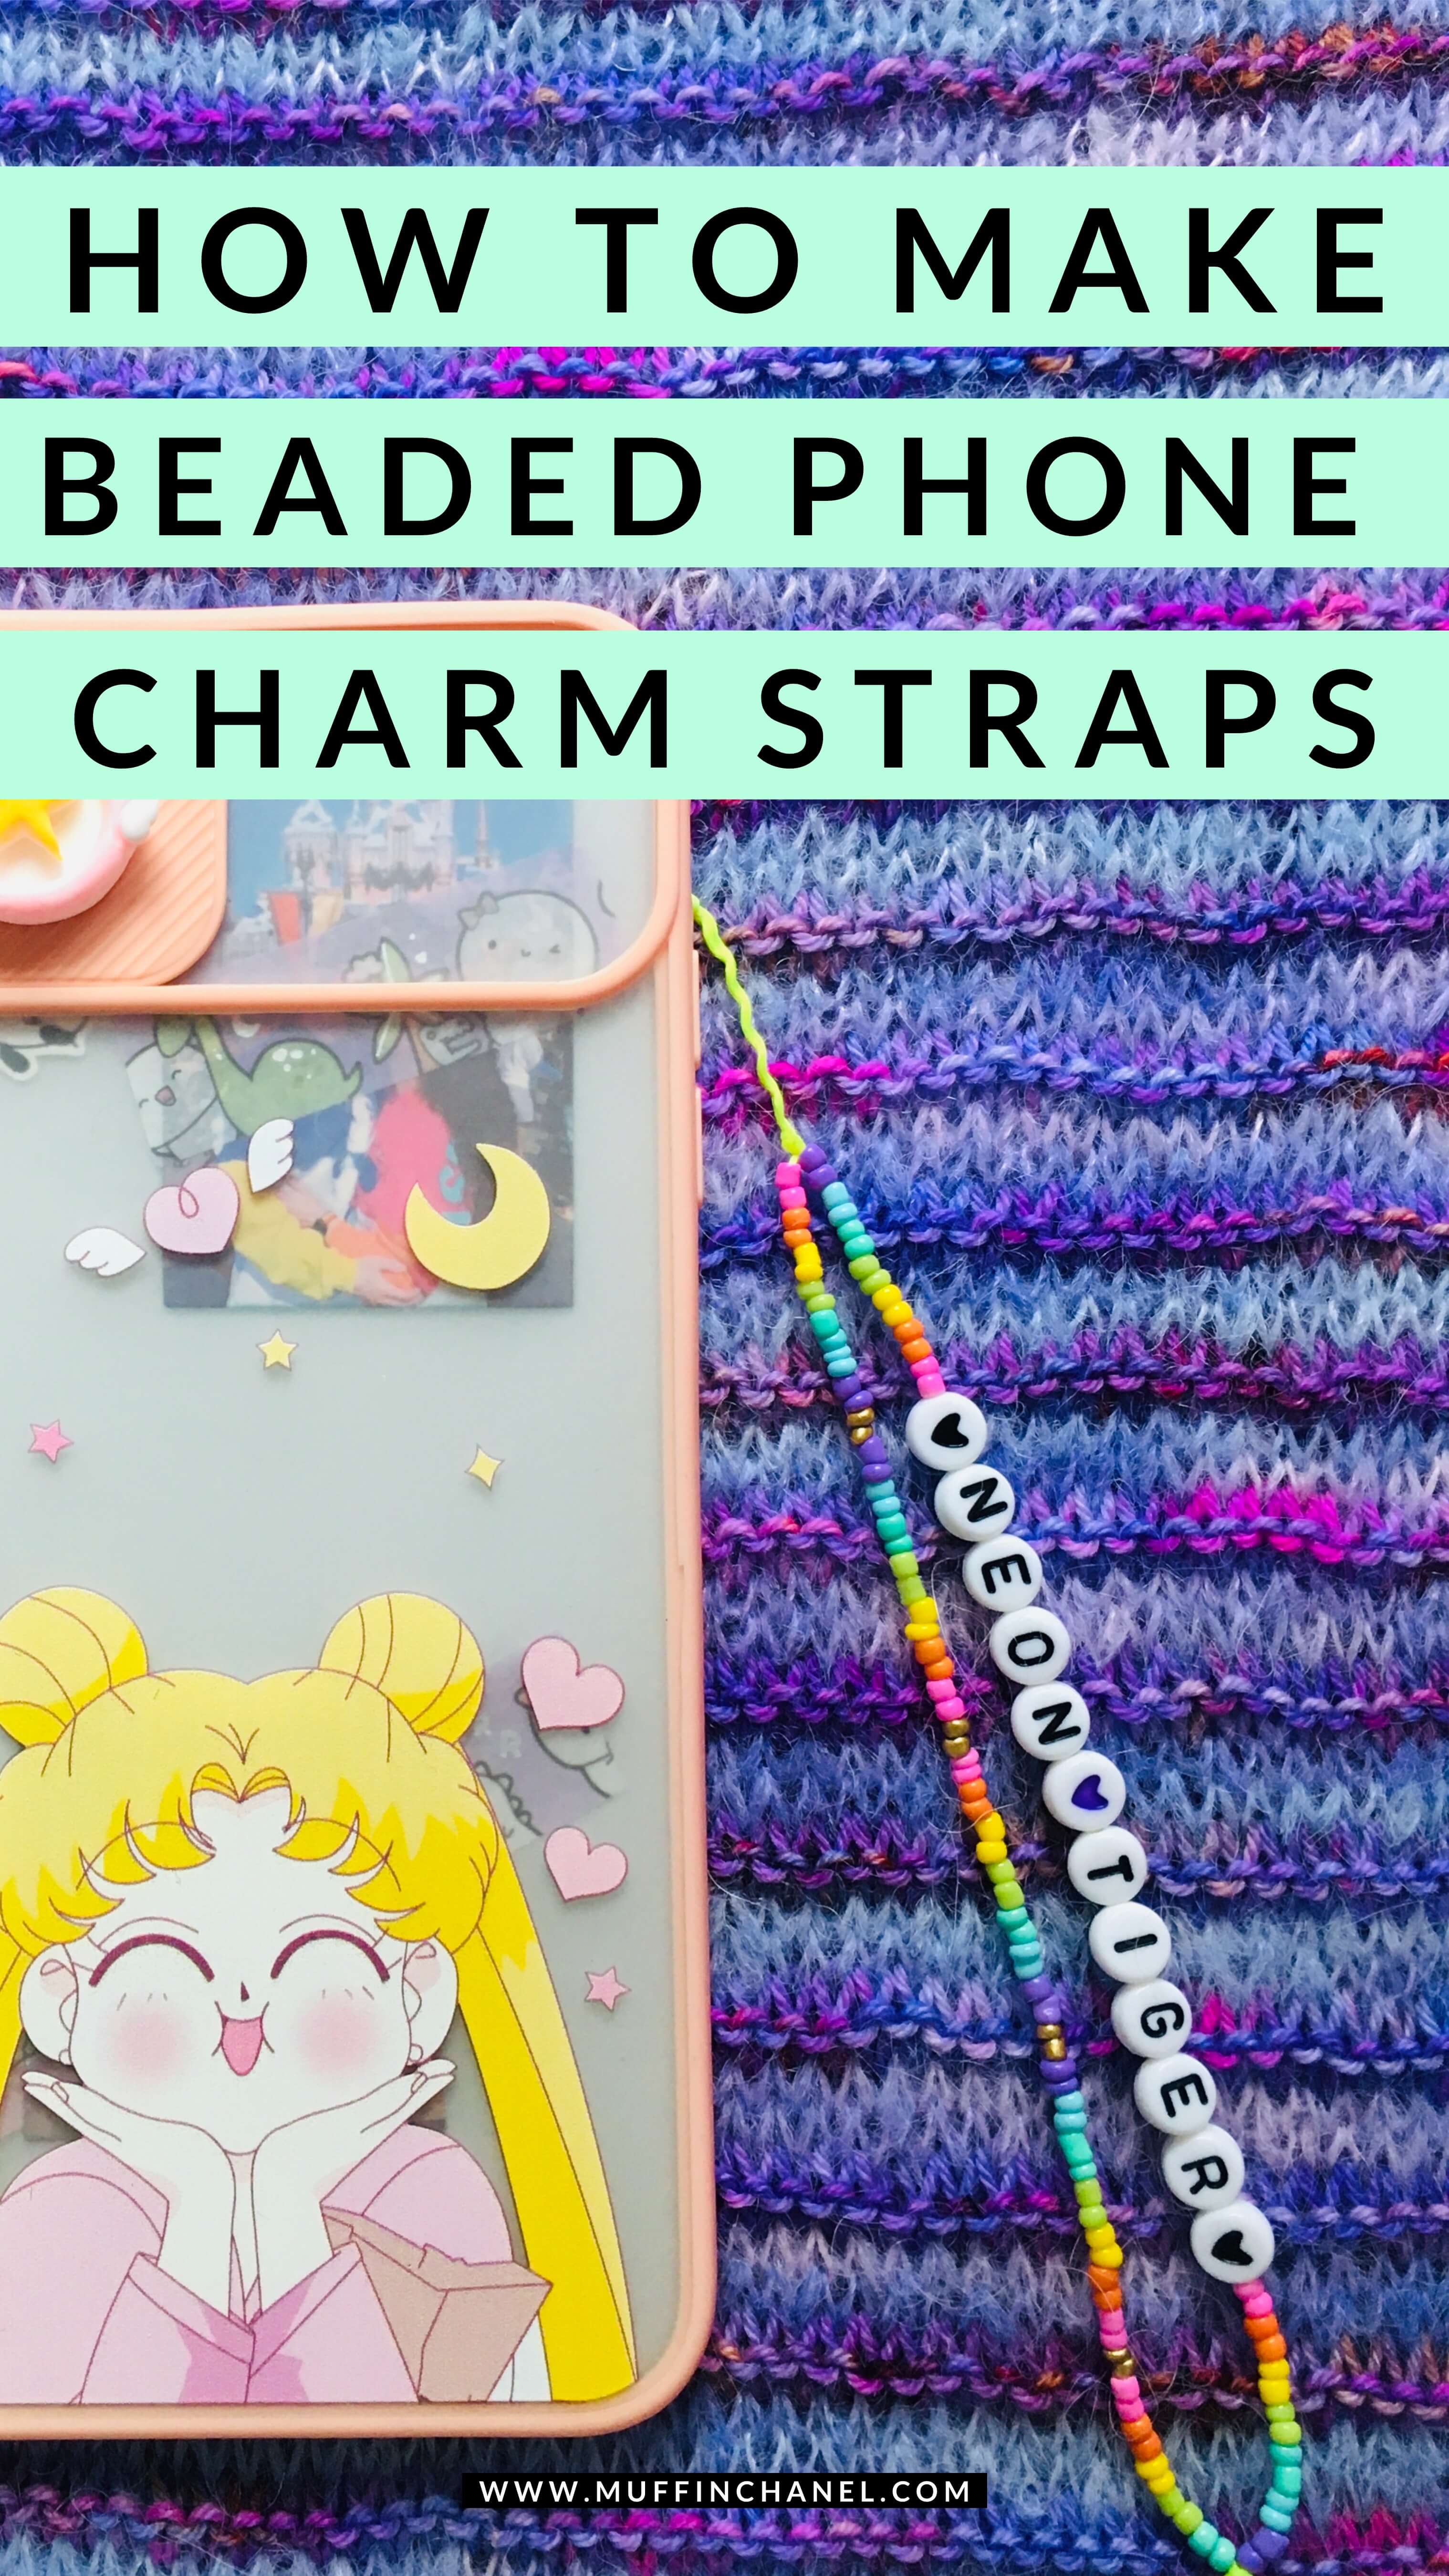 muffinchanel how to make beaded phone charm straps diy attach to iphone